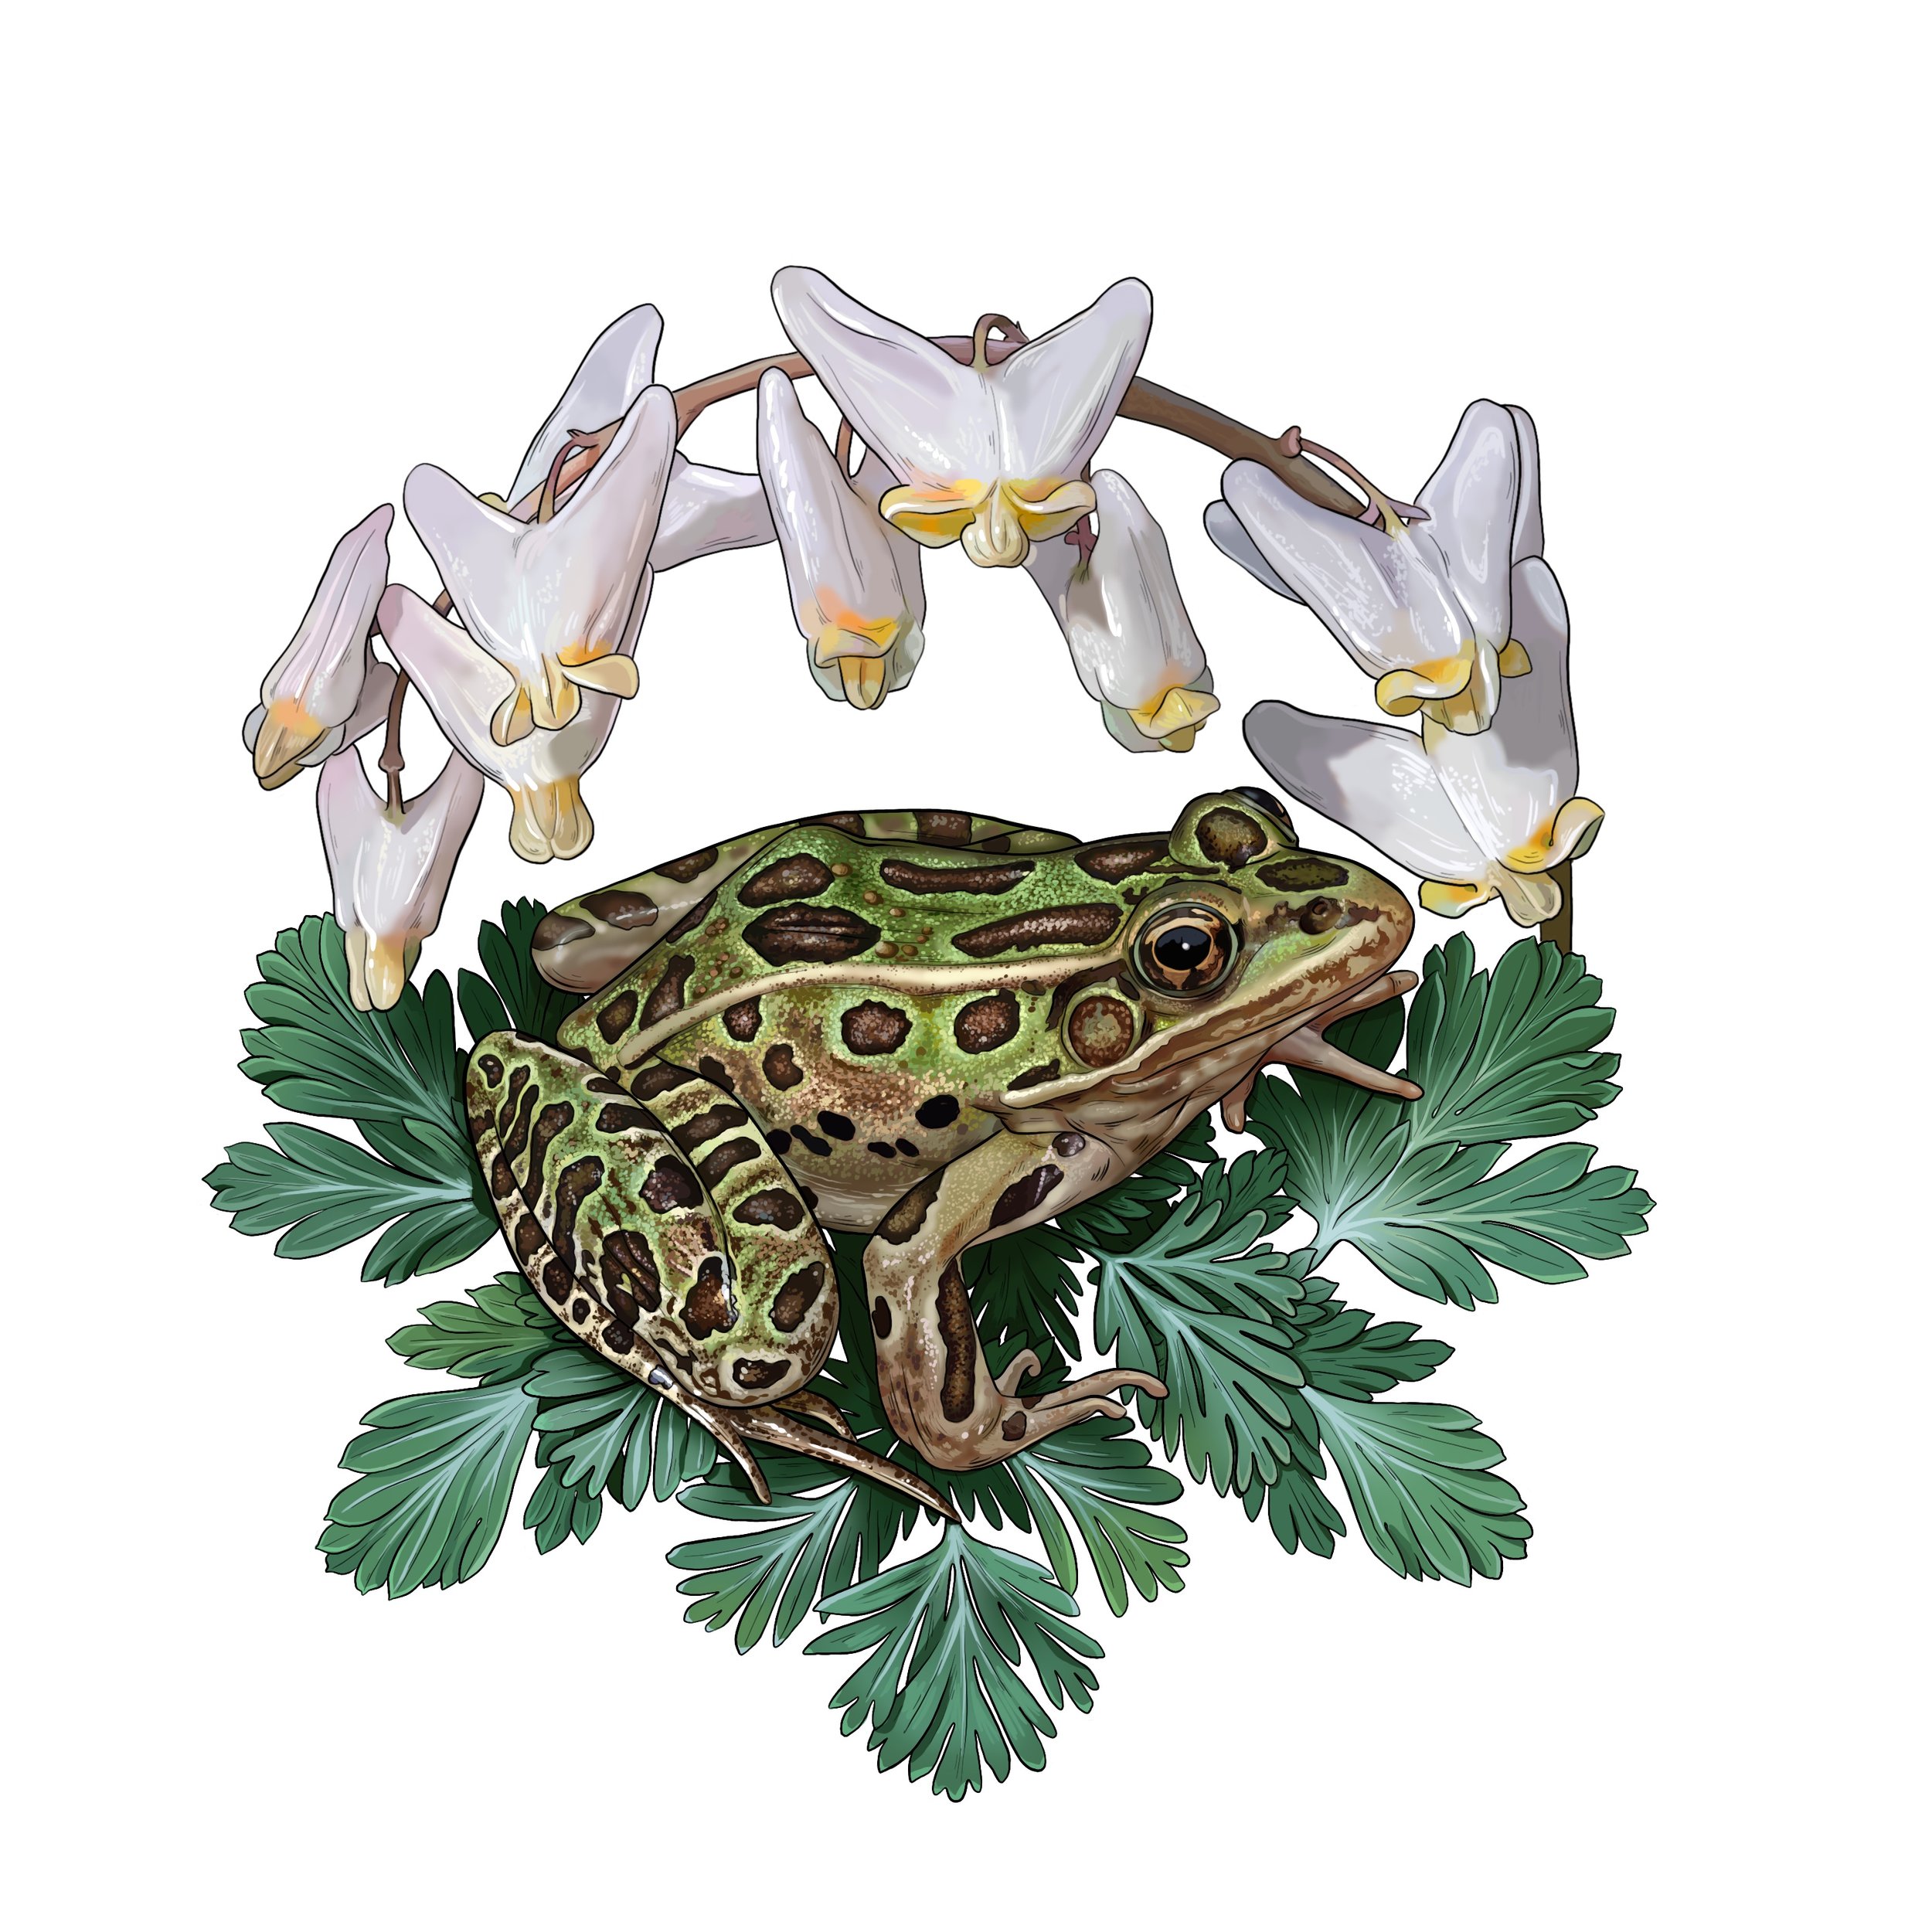 Northern Leopard Frog and Dutchman's Breeches